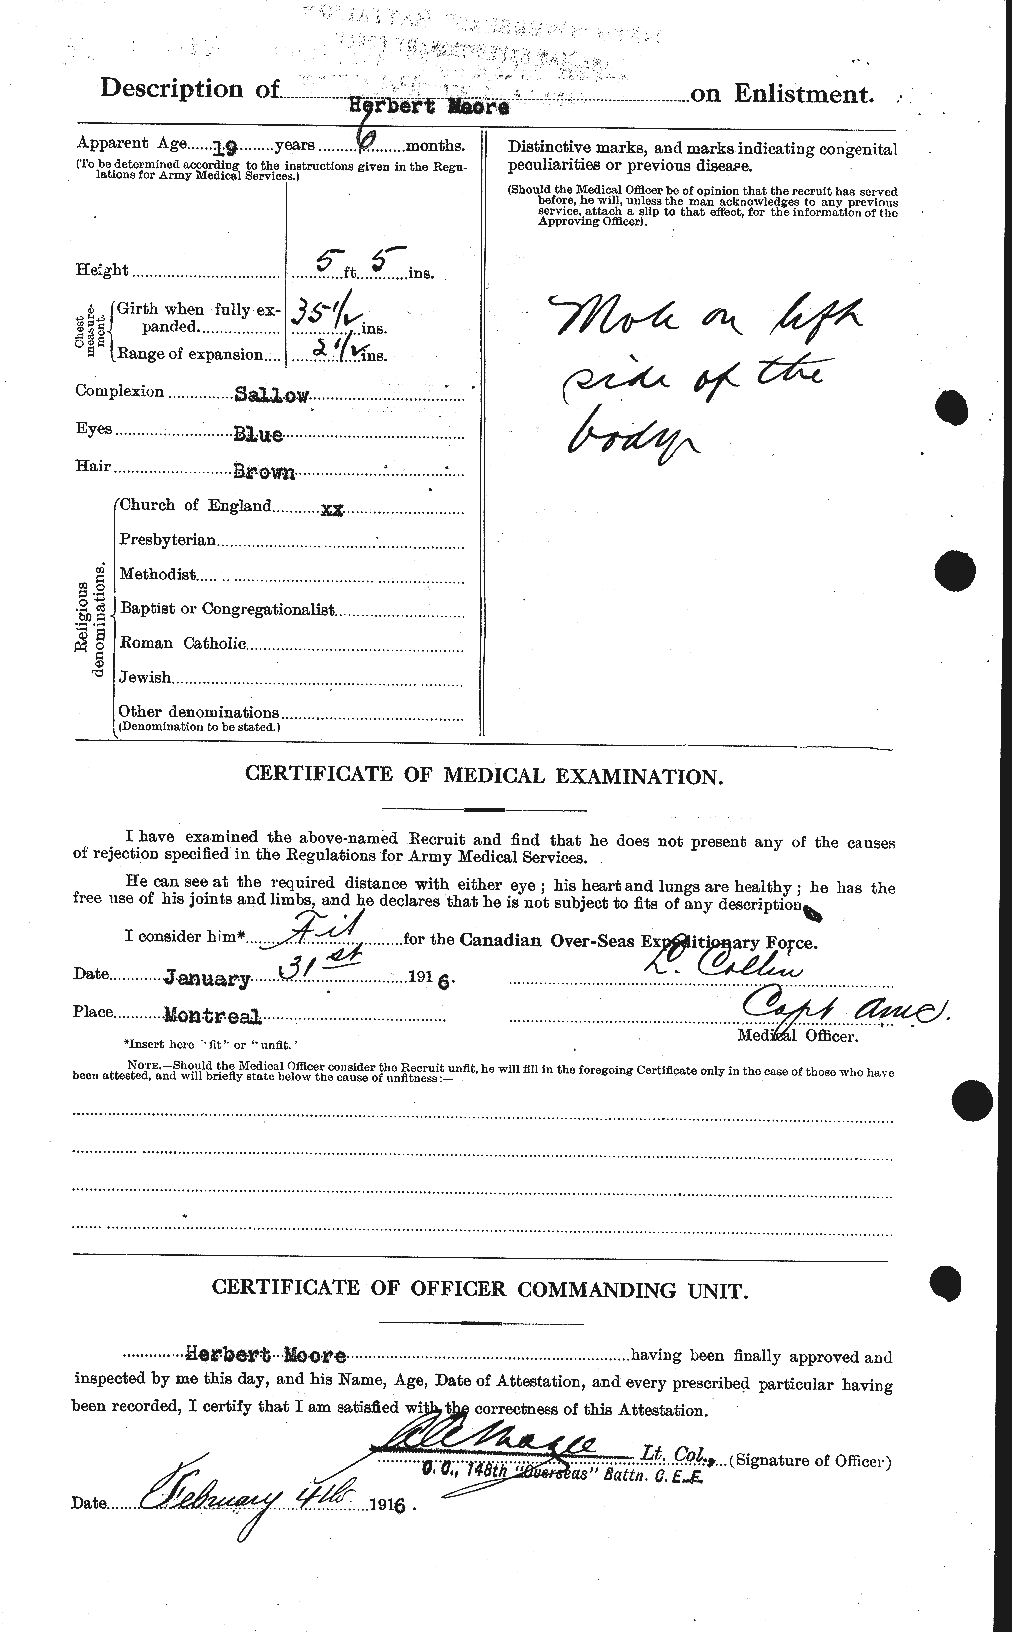 Personnel Records of the First World War - CEF 502111b